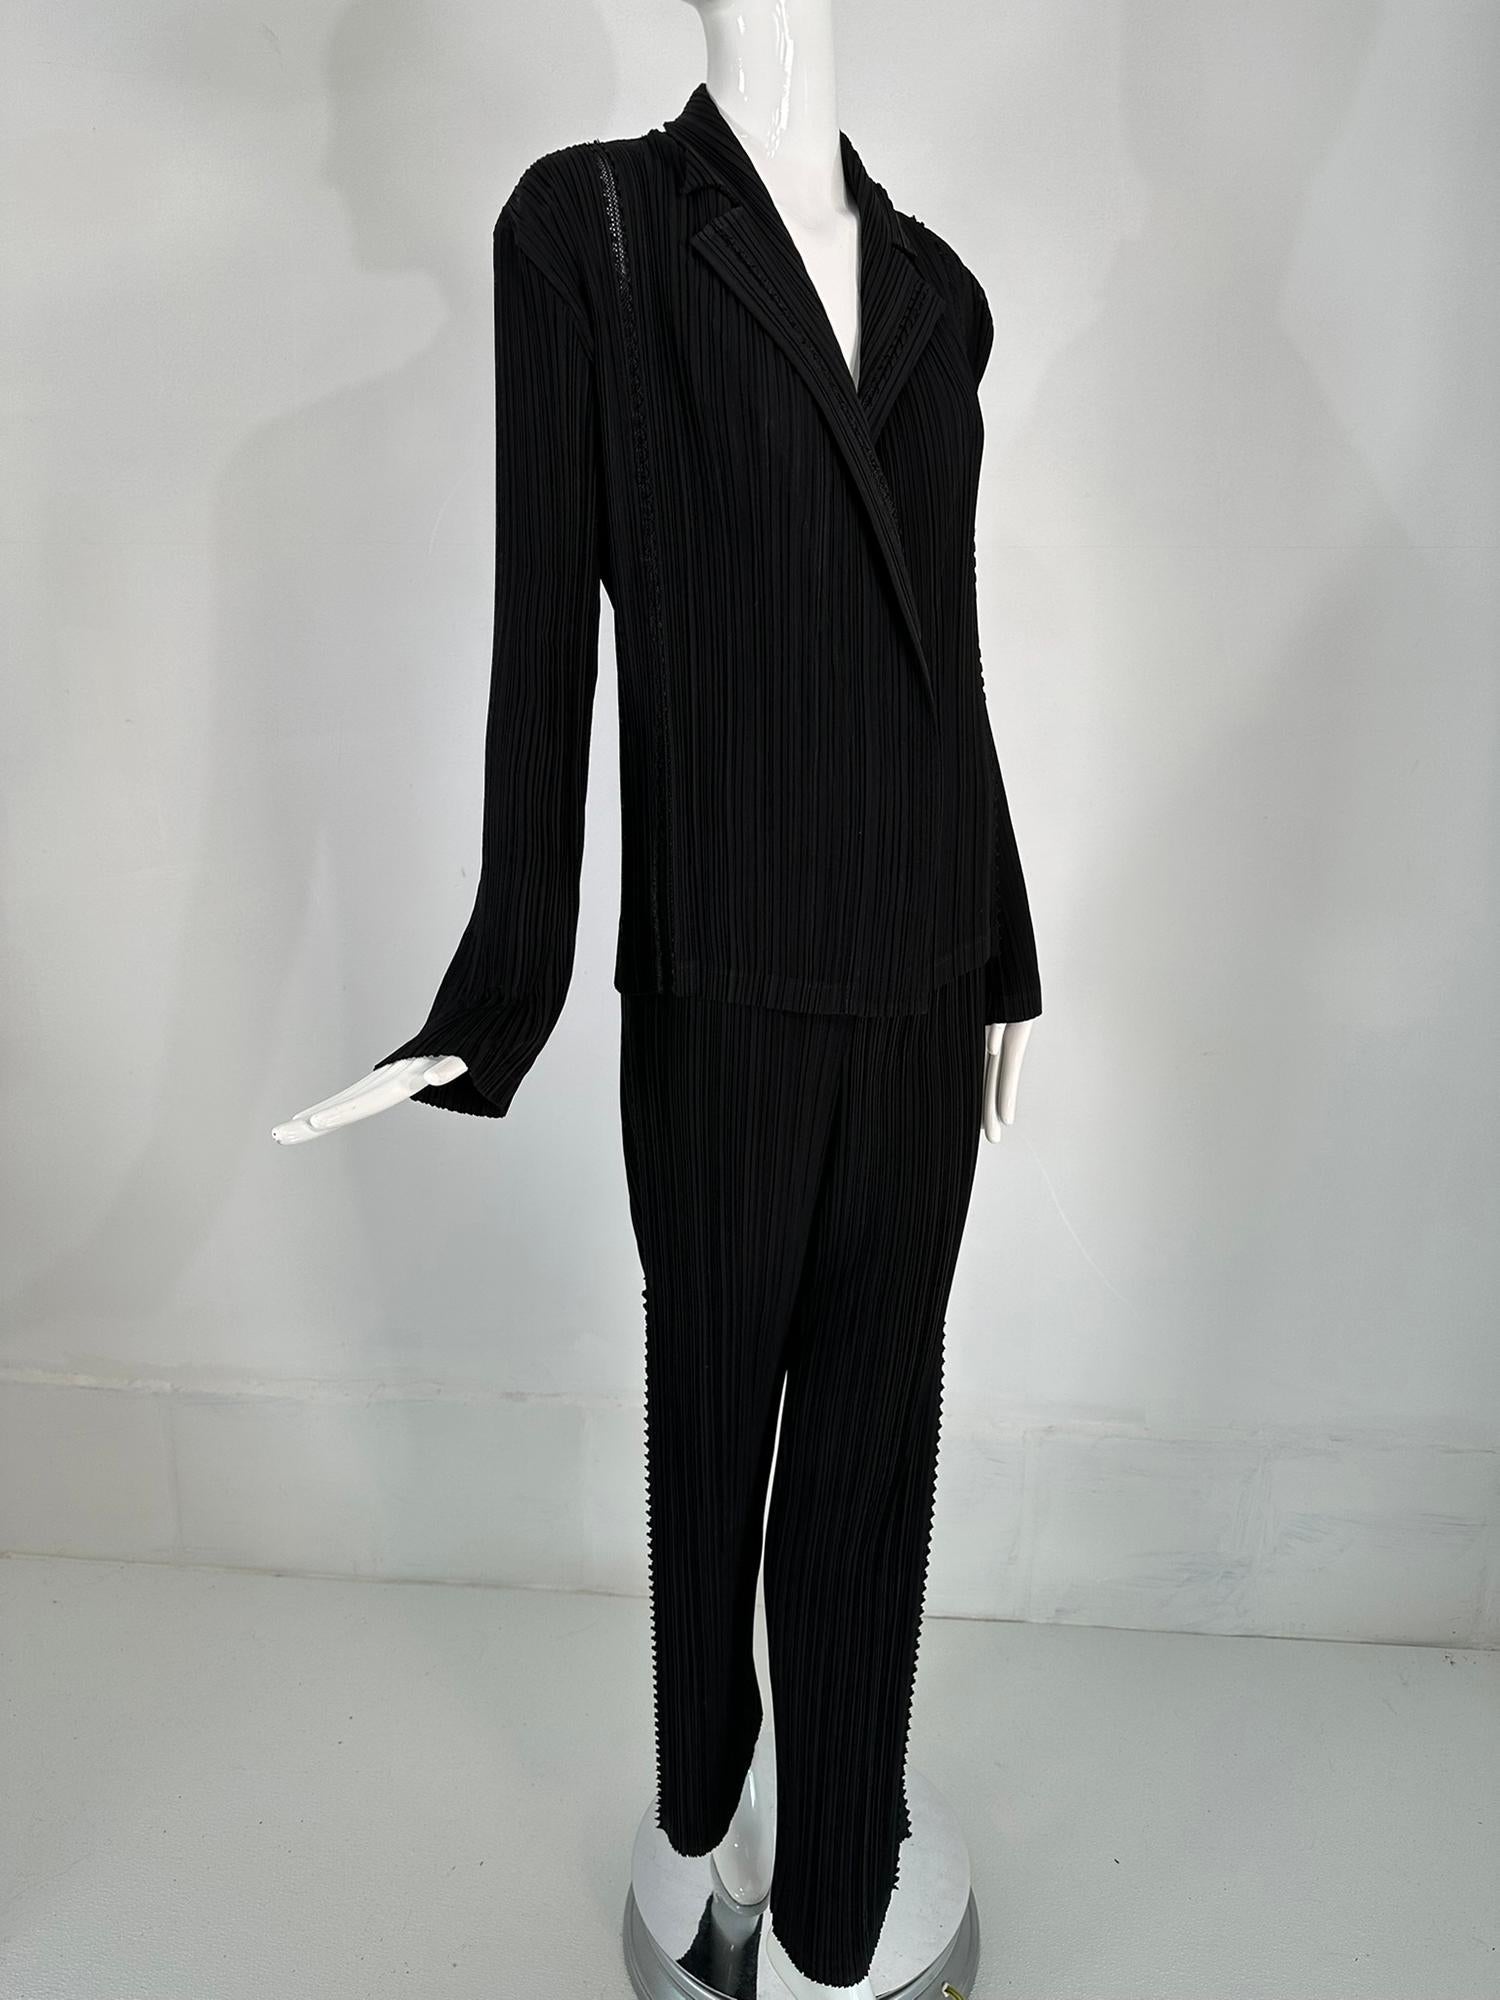 Women's Issey Miyake Fete 2pc Jacket & Pant Black Pleats with Open Mesh Insertion Size 4